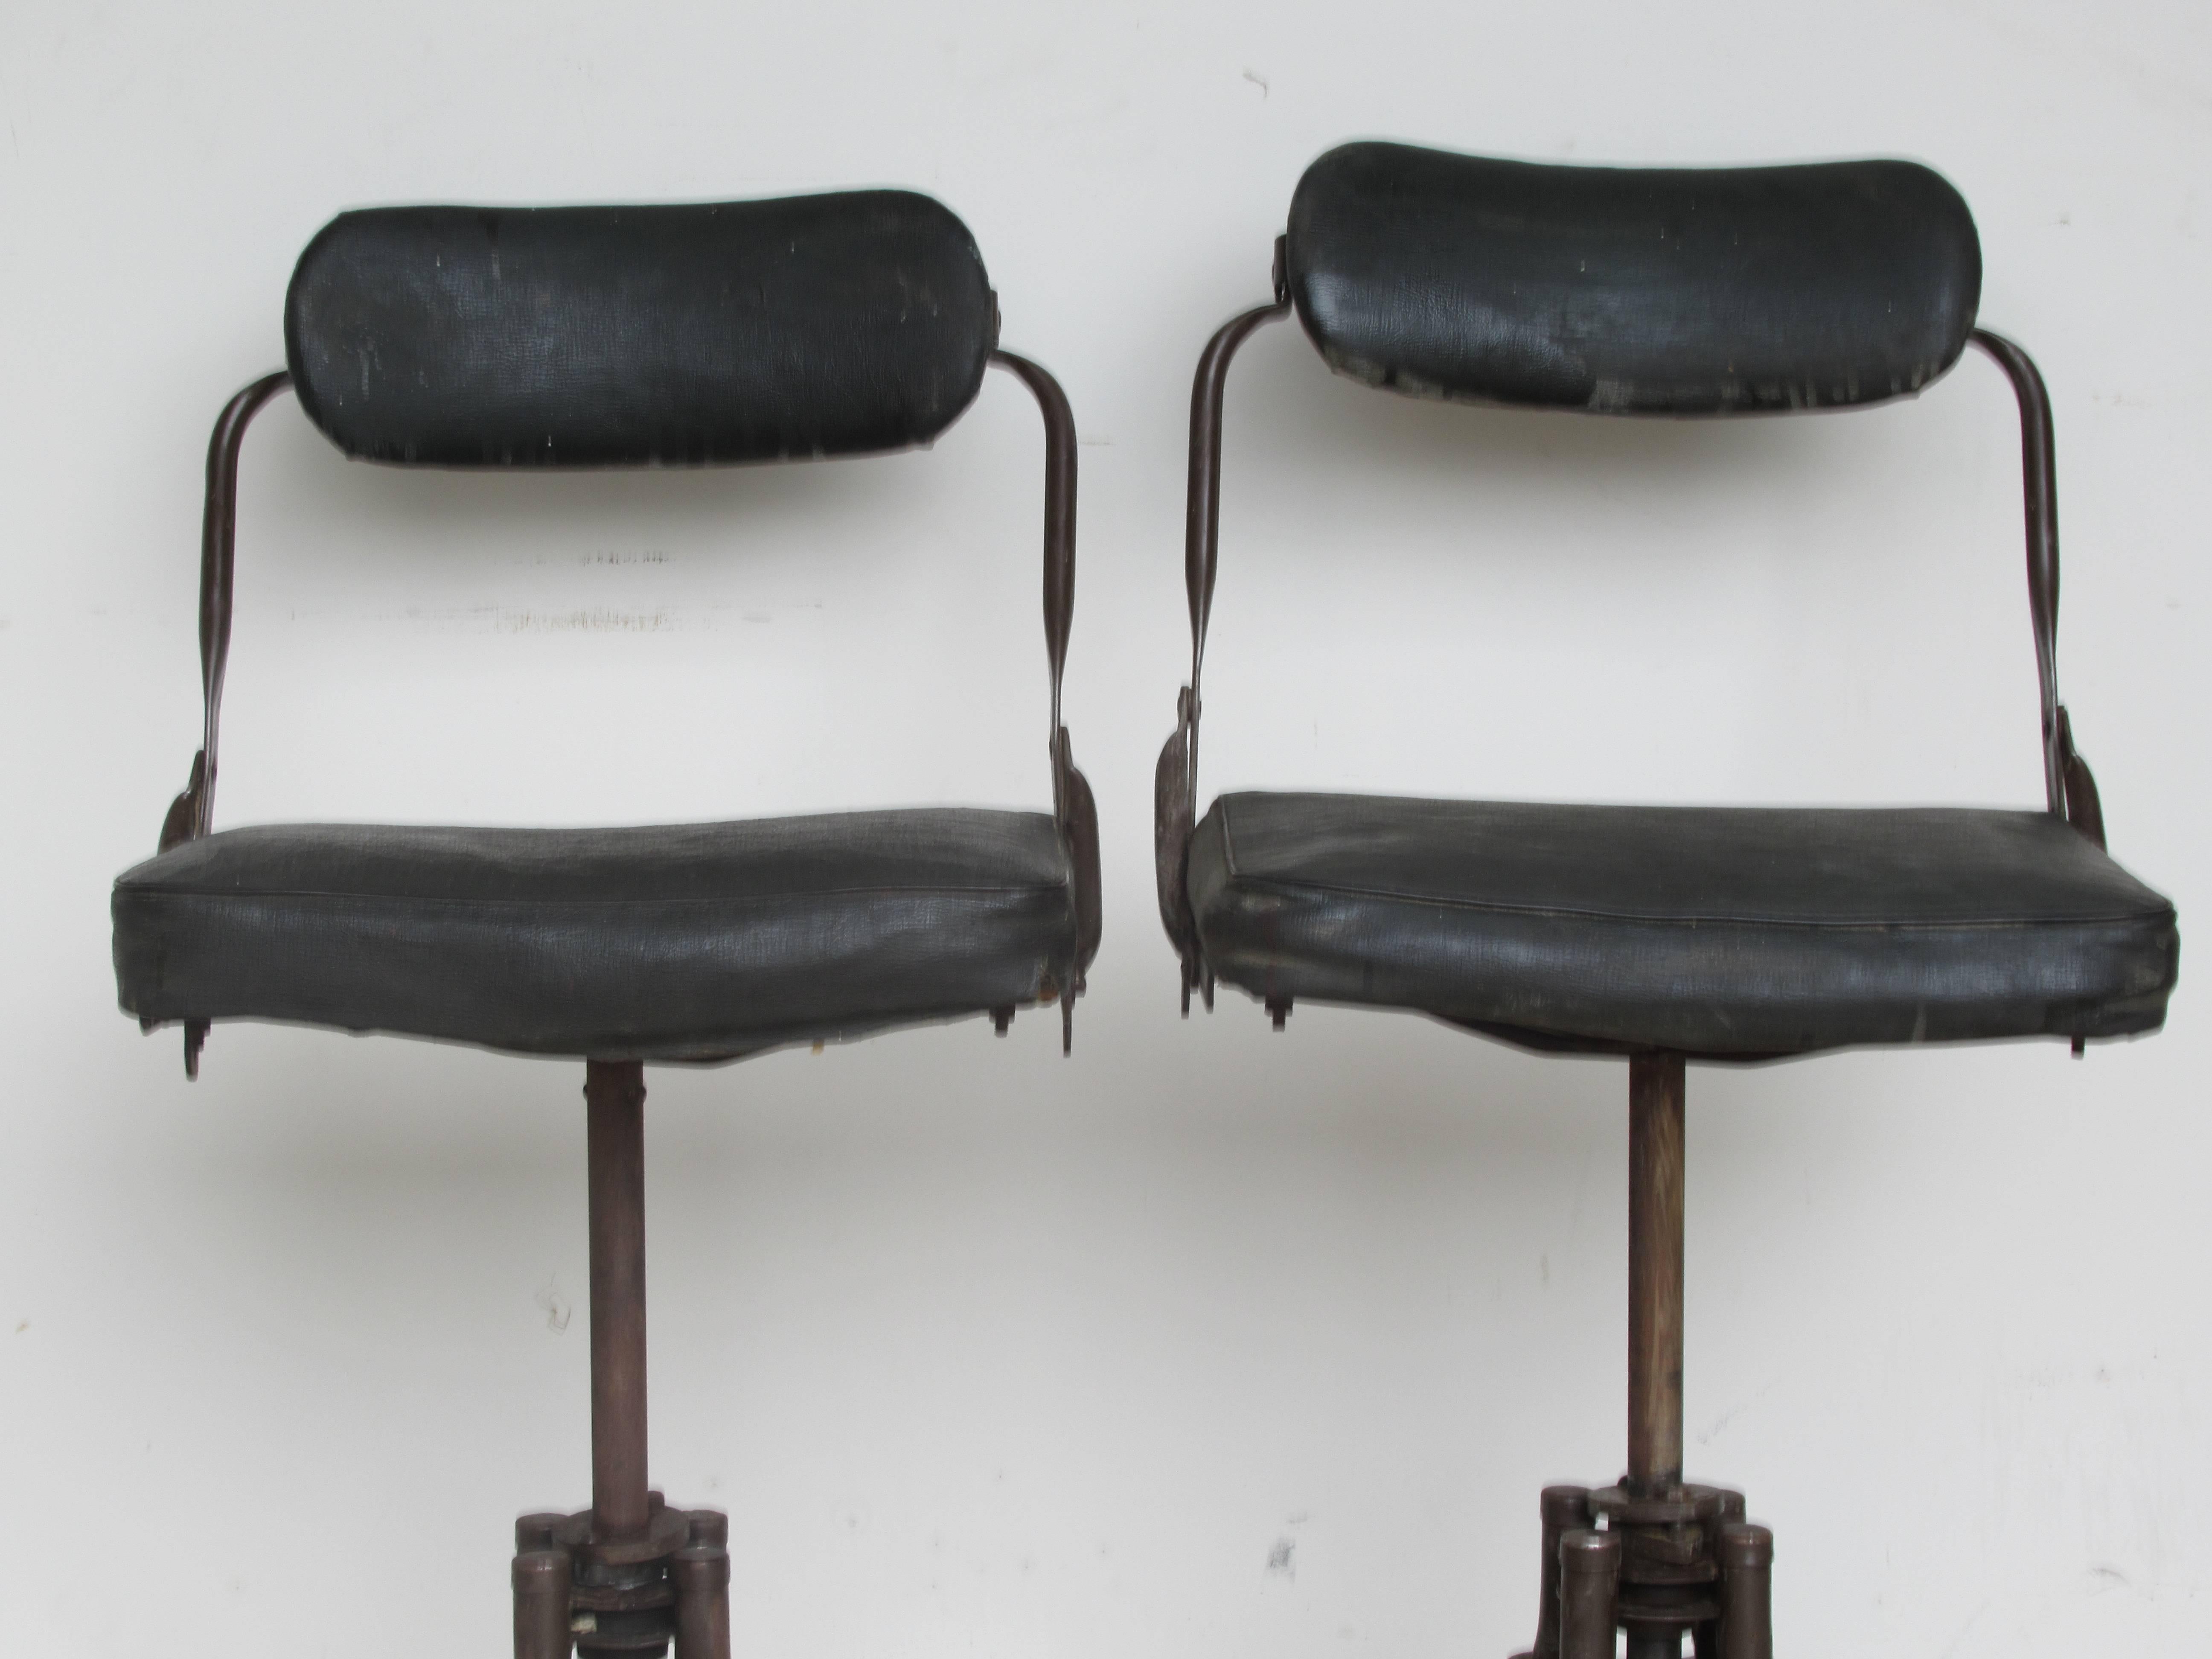 Pair of early all original American Industrial rolling swivel adjustable position task chairs by Do More / Do-More, circa 1930-1940.